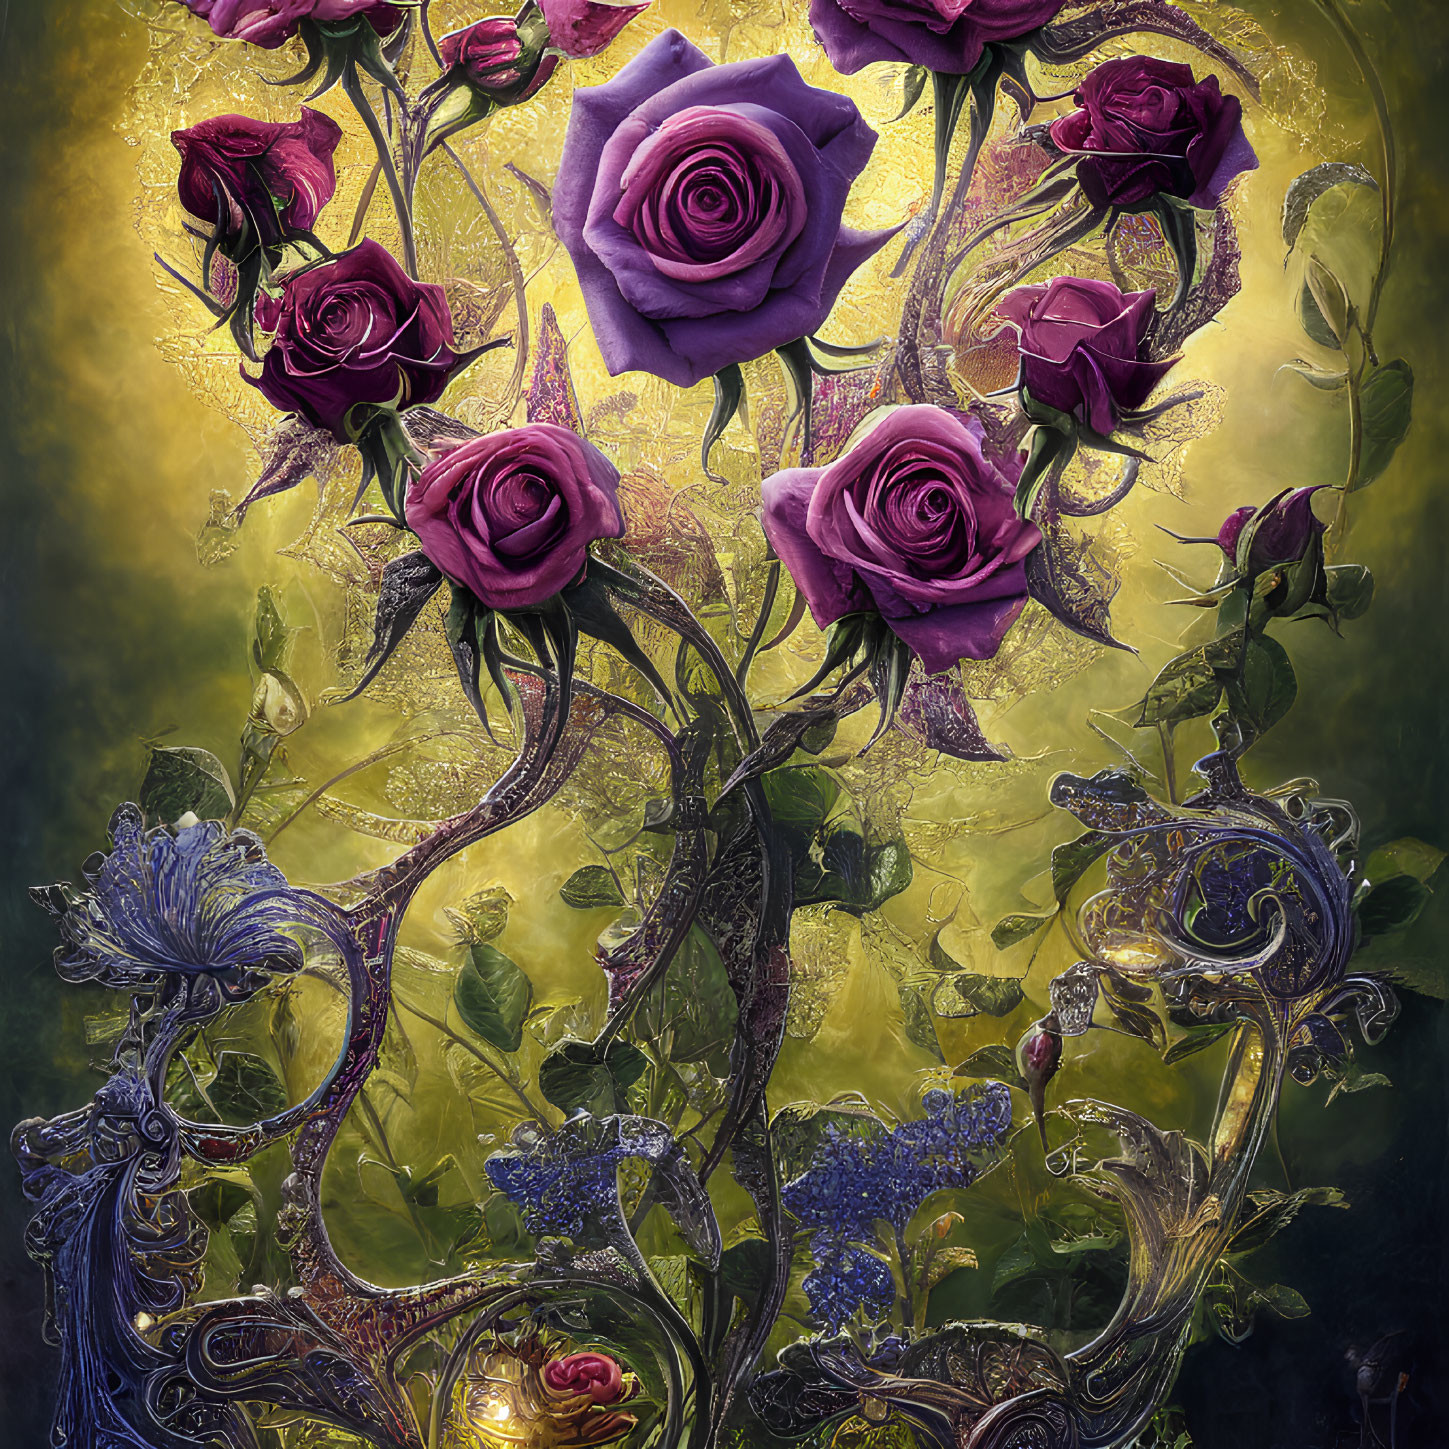 Purple Roses Entwined with Golden Filigree on Yellow Background